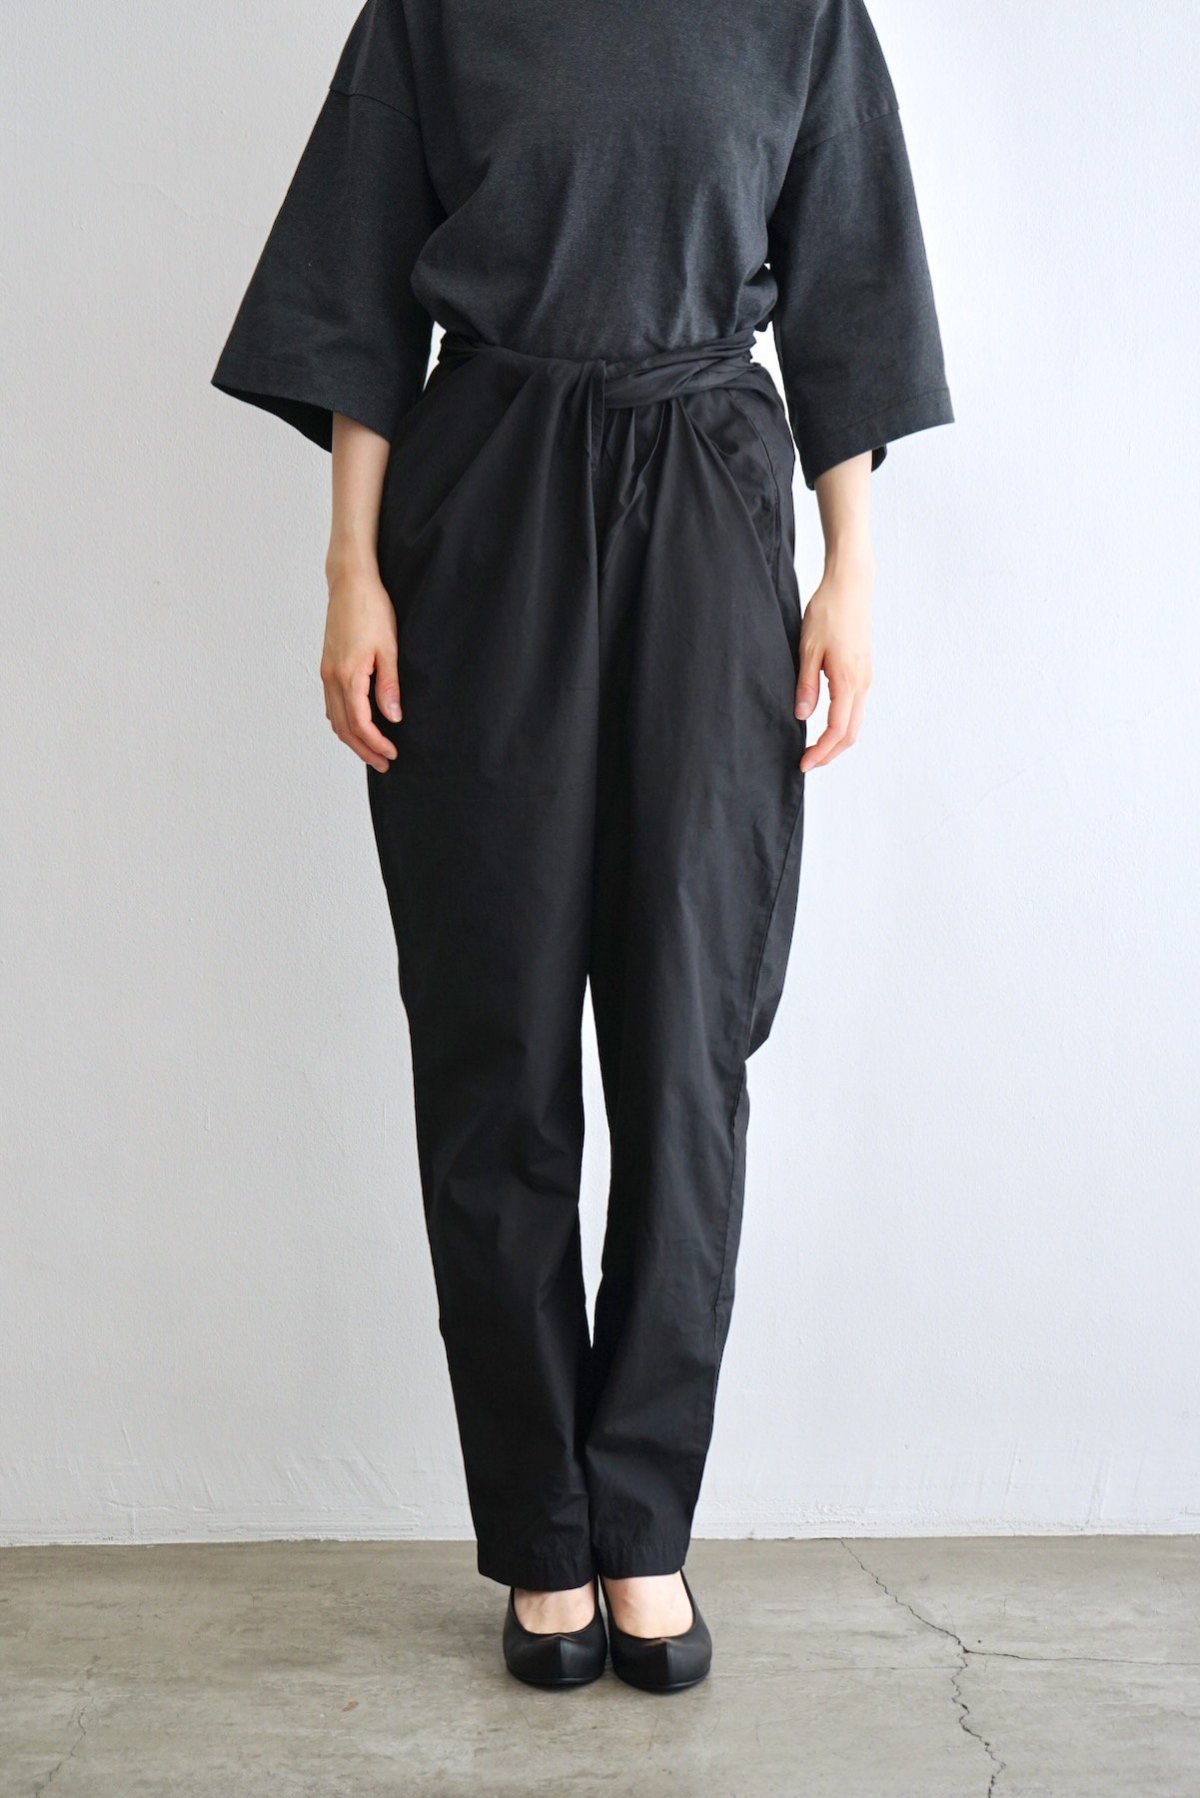 COSMIC WONDER / Suvin cotton broadcloth wrapped pants  /  Black